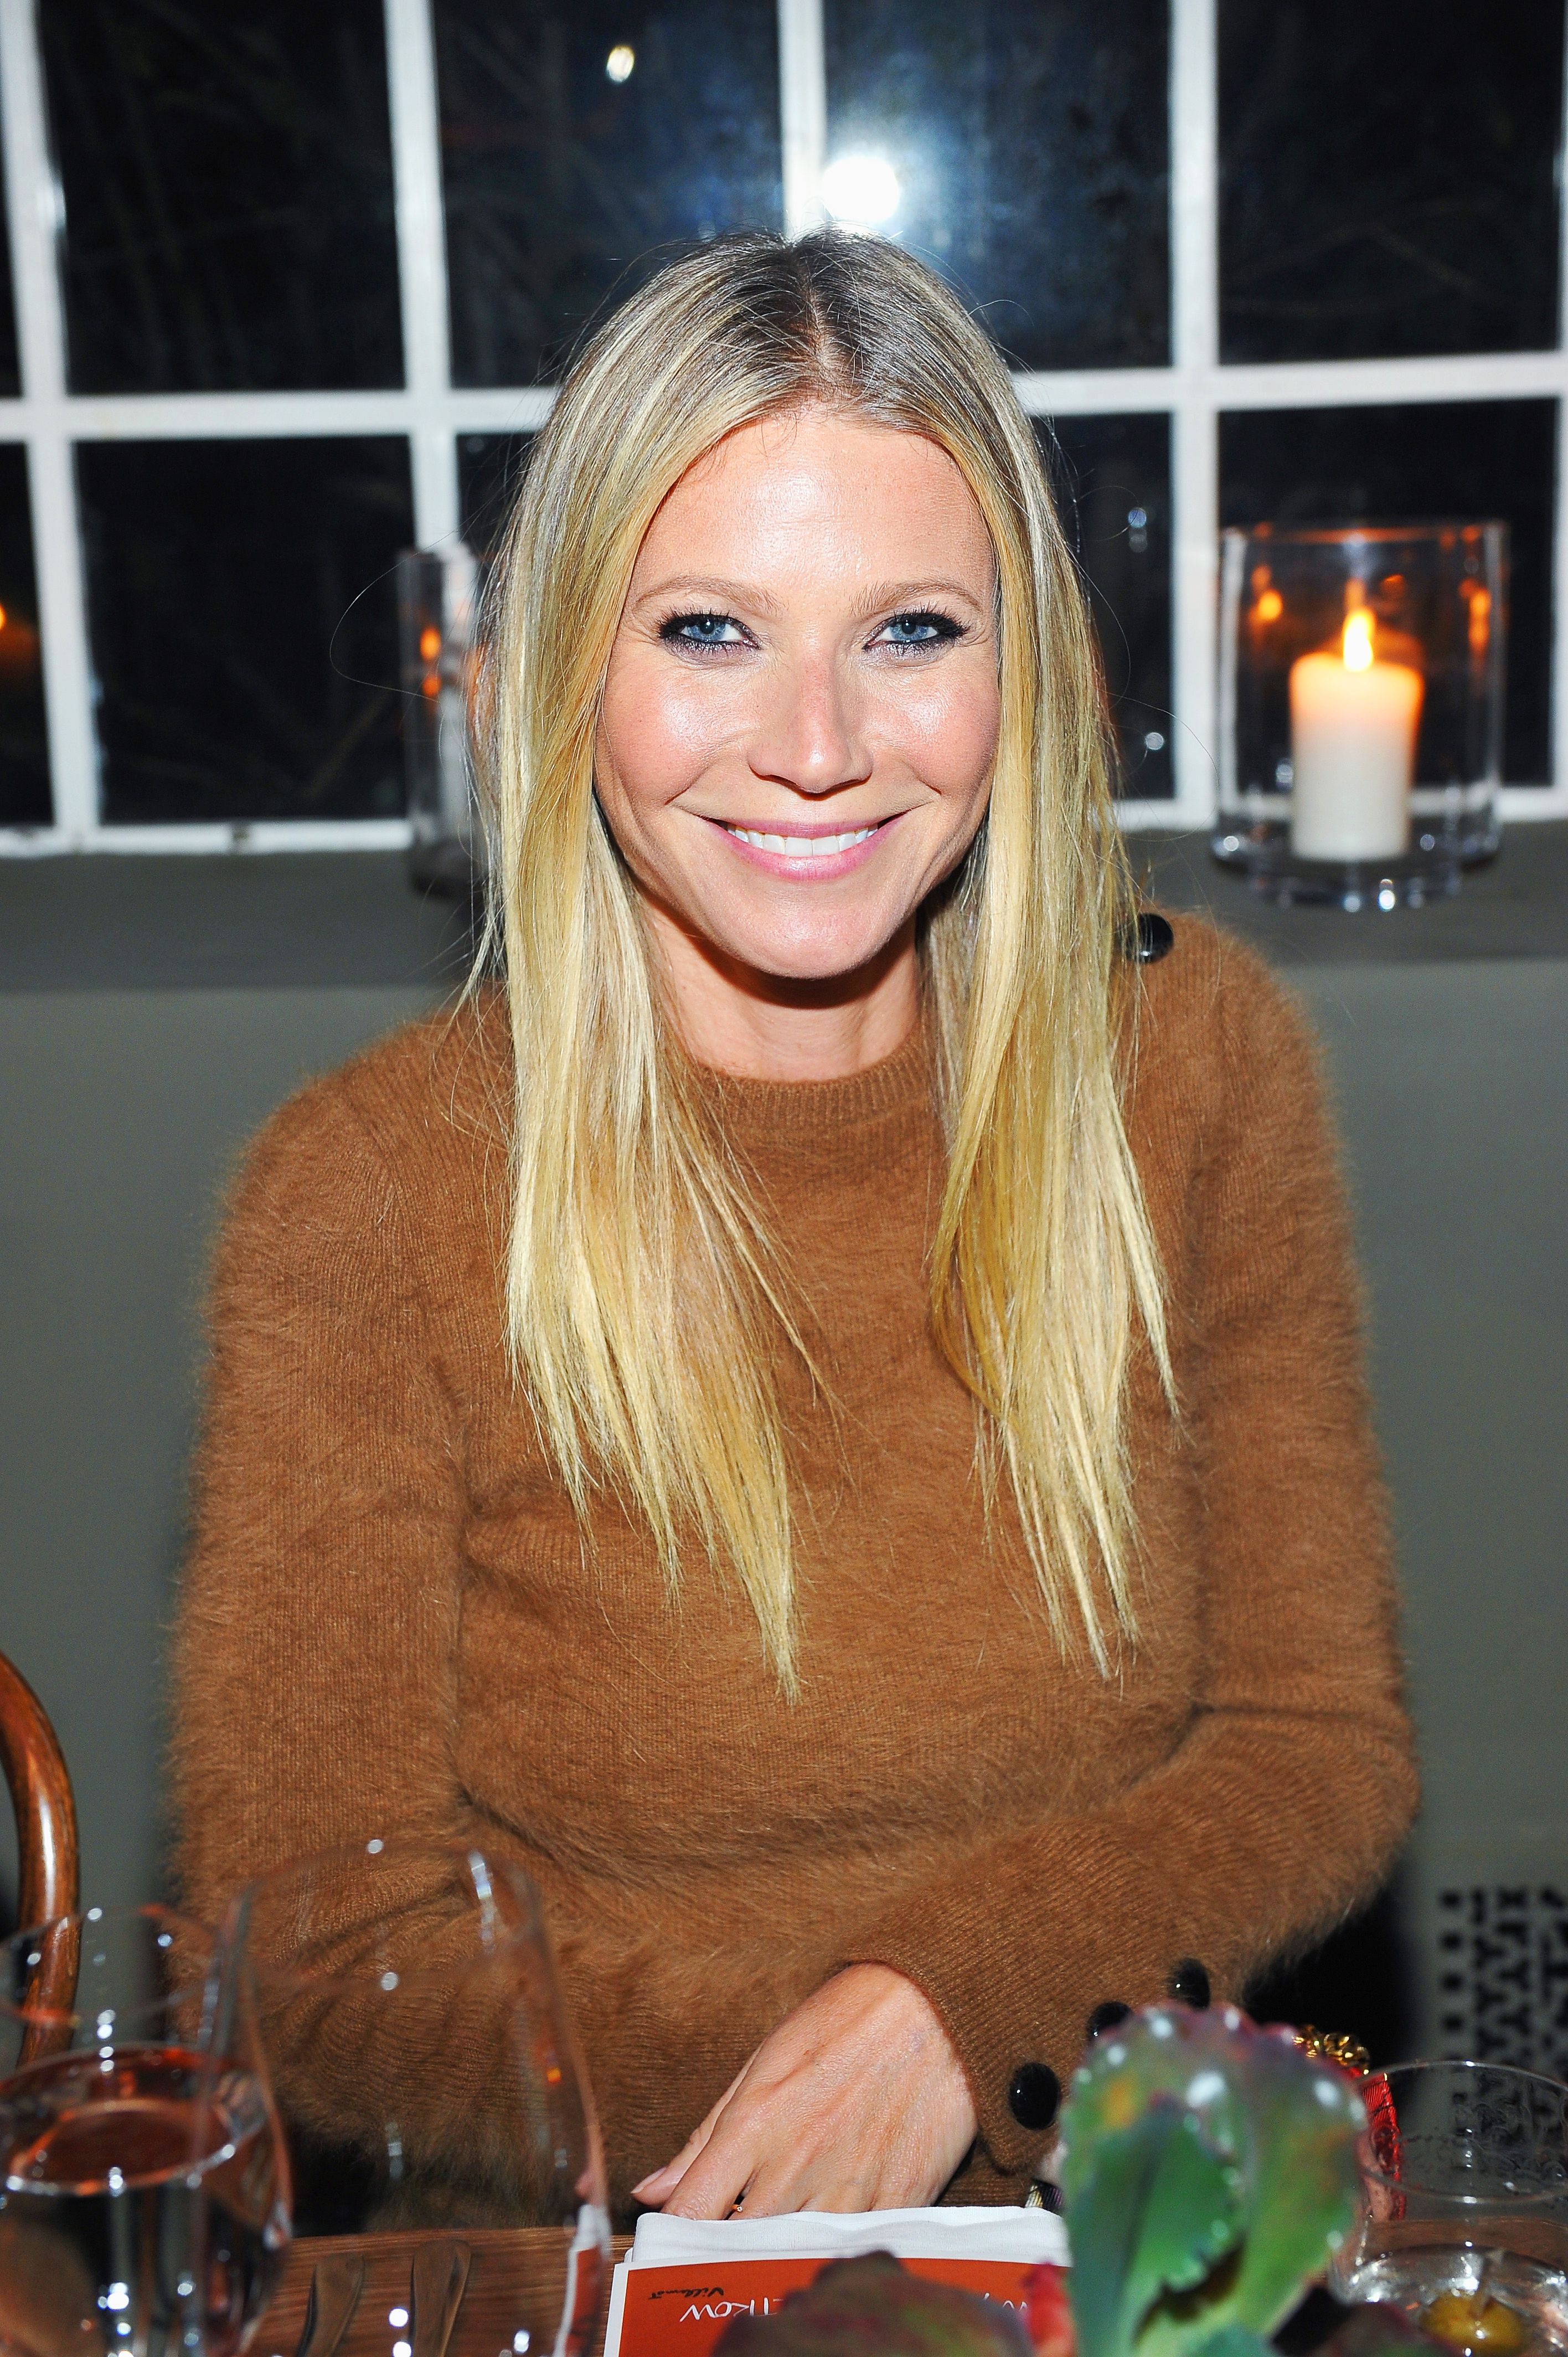 Gwyneth Paltrow's Goop Inspires Retailers to Sell Sex Toys